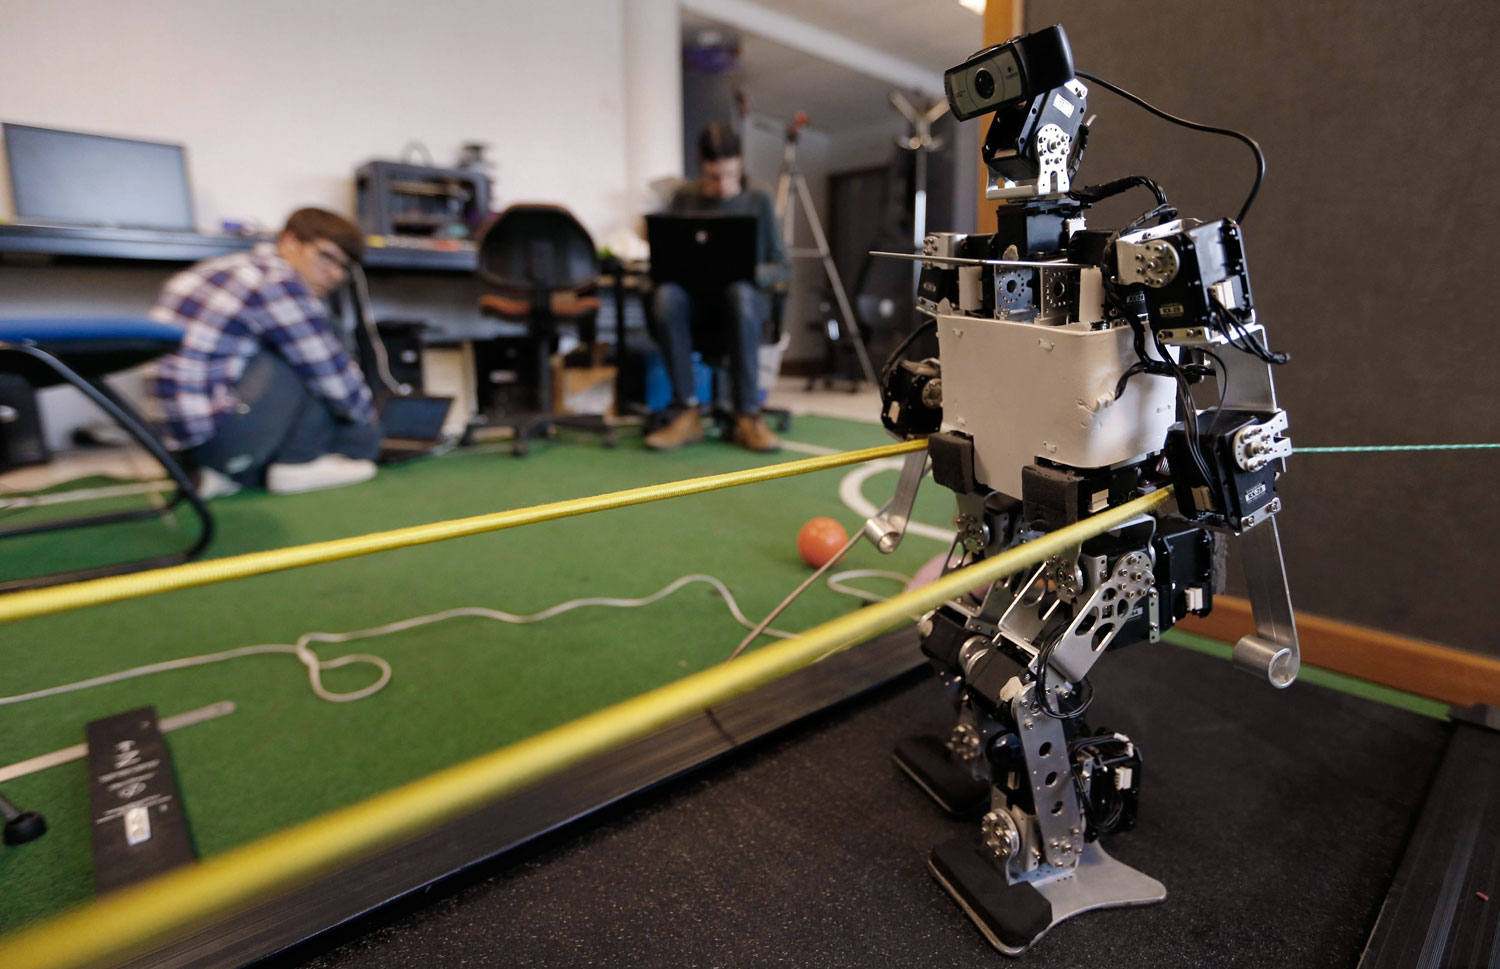 Members of the Rhoban project's team check functions of a humanoid robot at the LaBRI workshop in Talence, France on July 7, 2014.